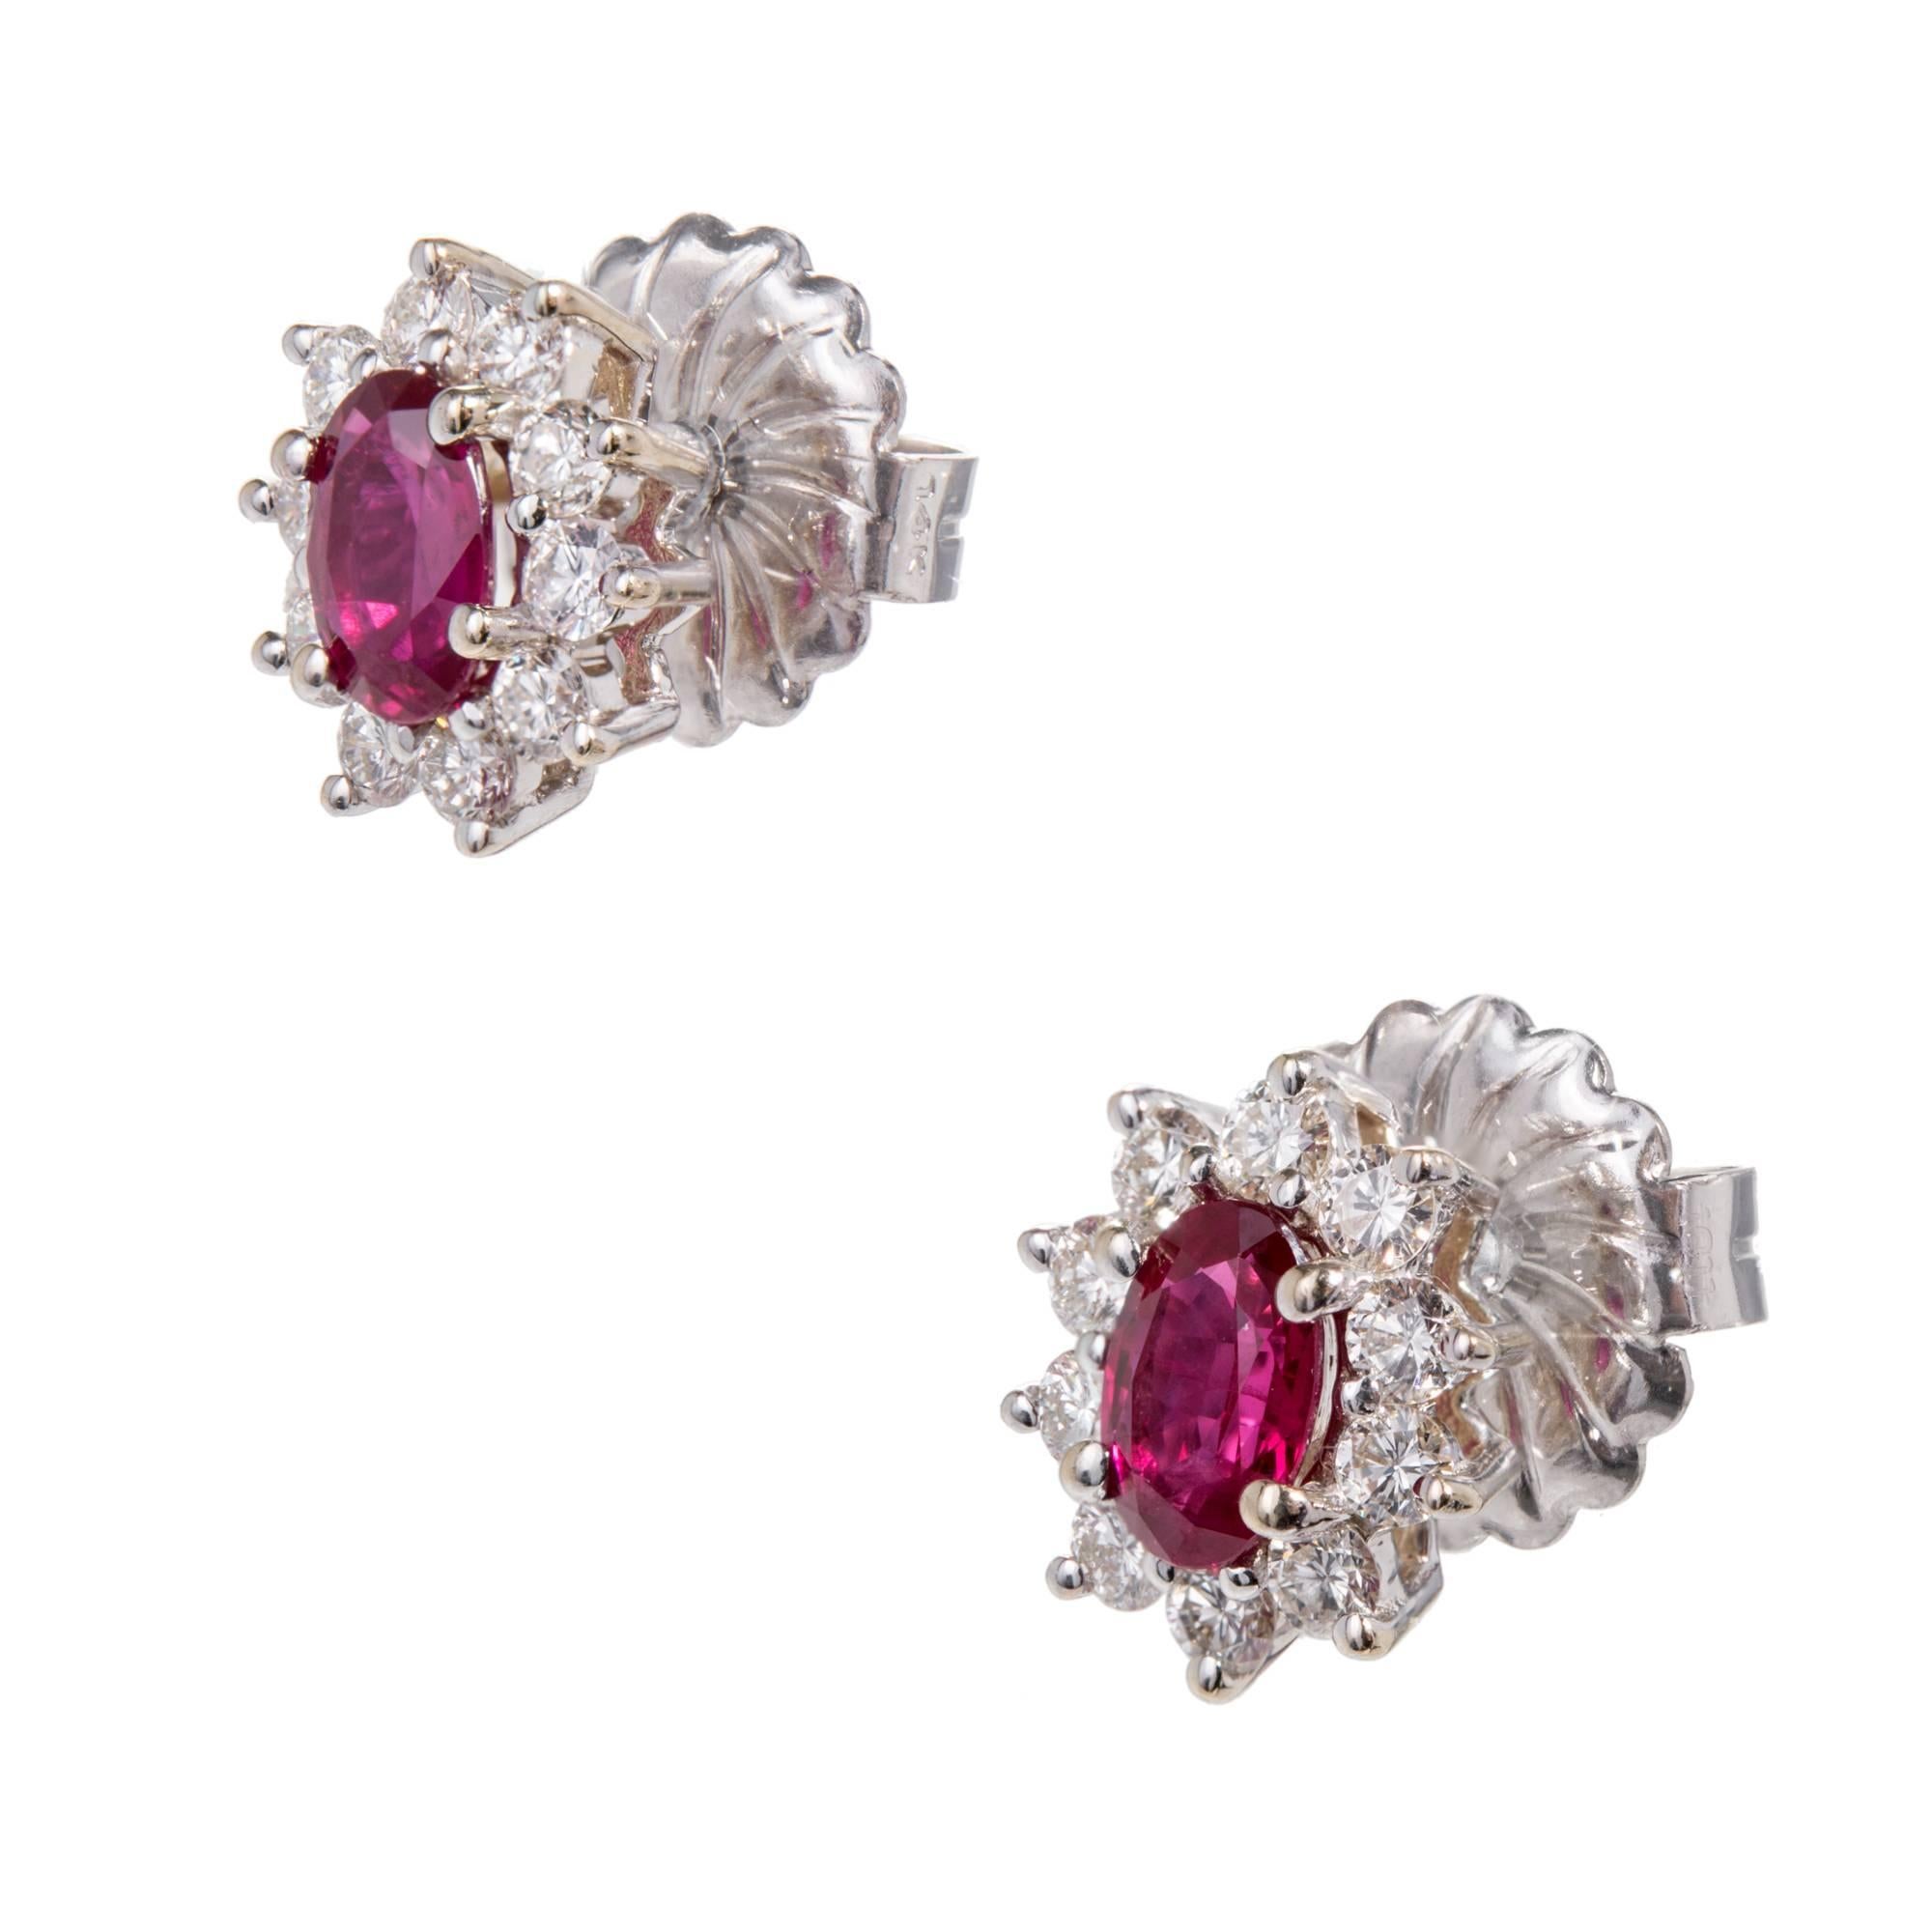 Oval ruby and diamond halo 14k and 18k white gold earrings. Heat with minor residue in fissures. Natural corundum. GIA certified. Backs tested and stamped 14k, circa 1970-1980. Earrings tested and posts stamped 750-18k. GIA certified in the